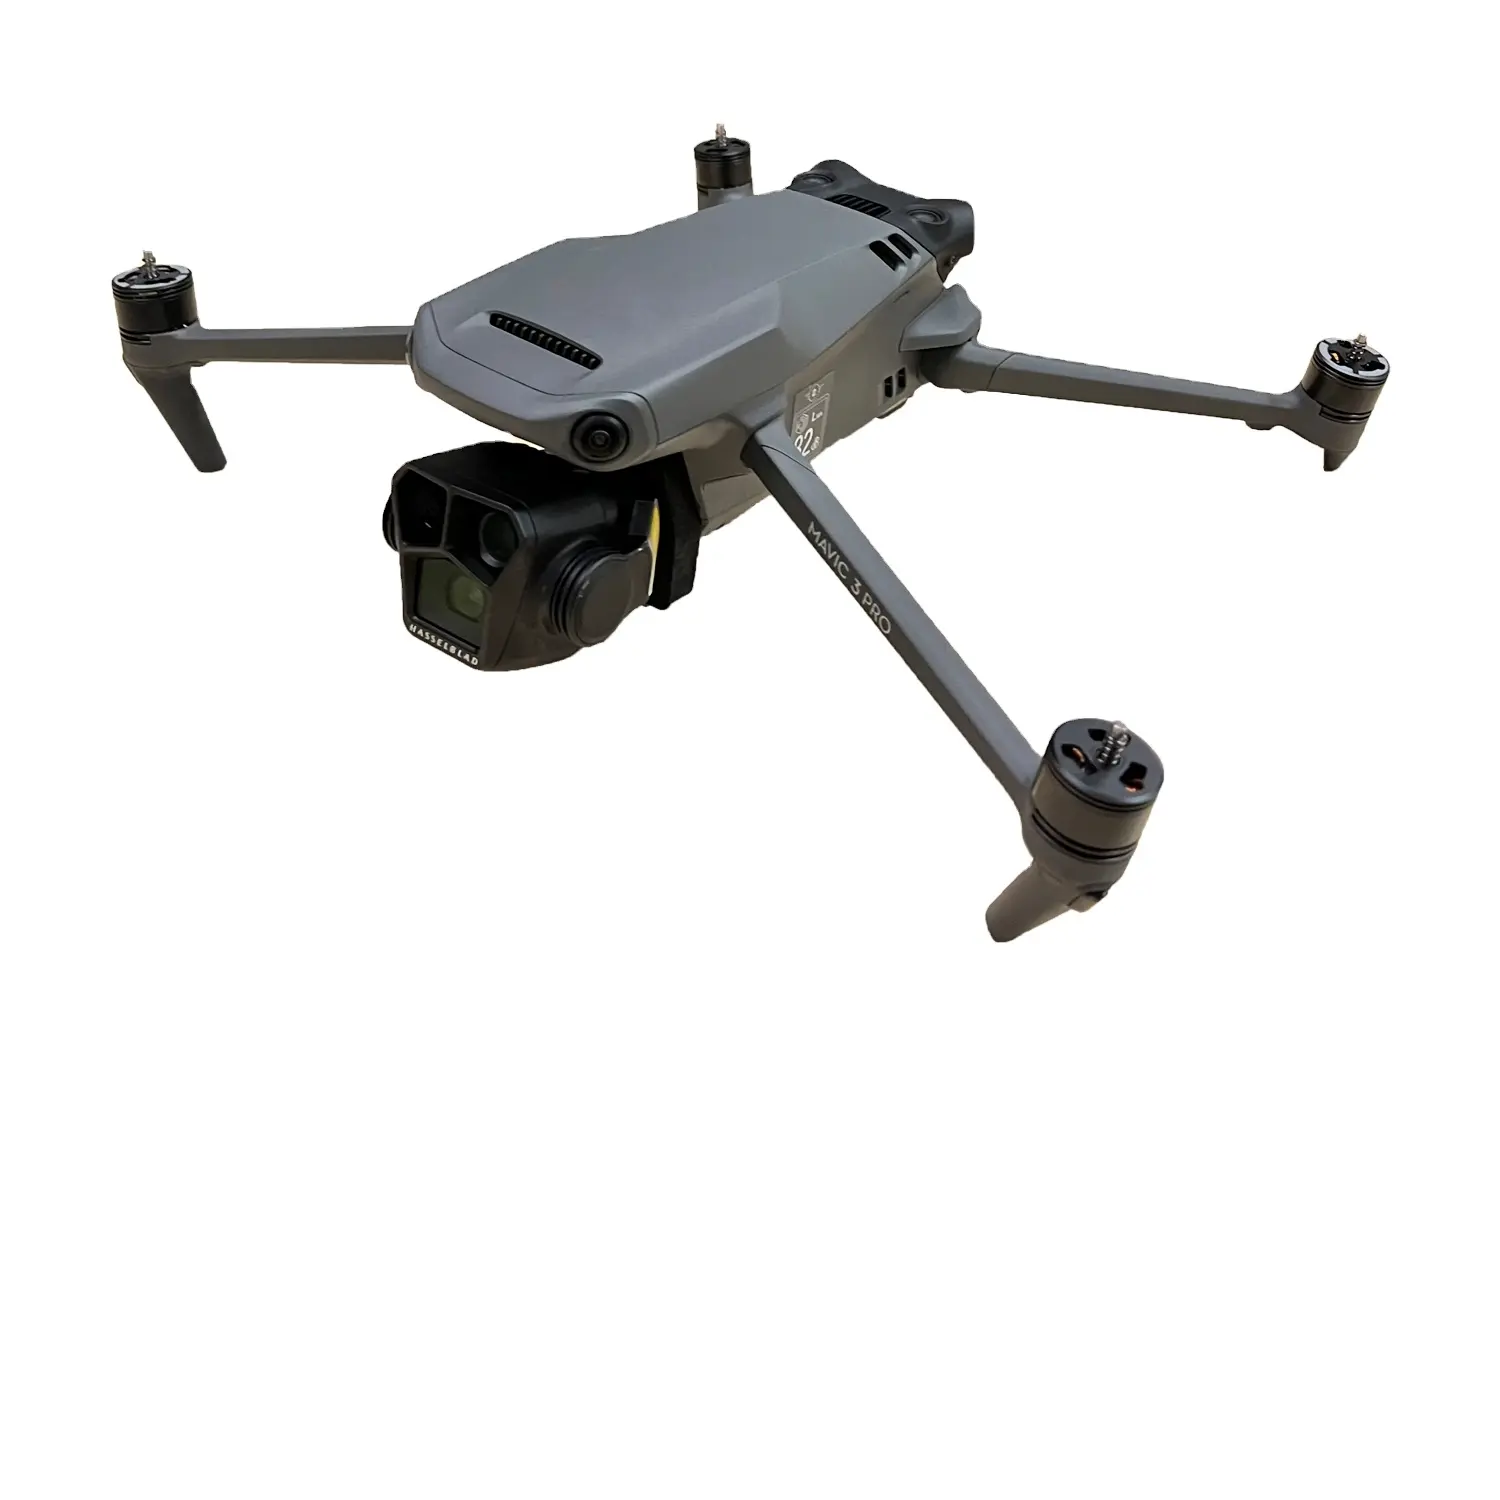 Latest Mavic 3 Pro Drone With Camera Remote Control 10Km Image Transmission Foldable And Led Lights App Control Headless Mode